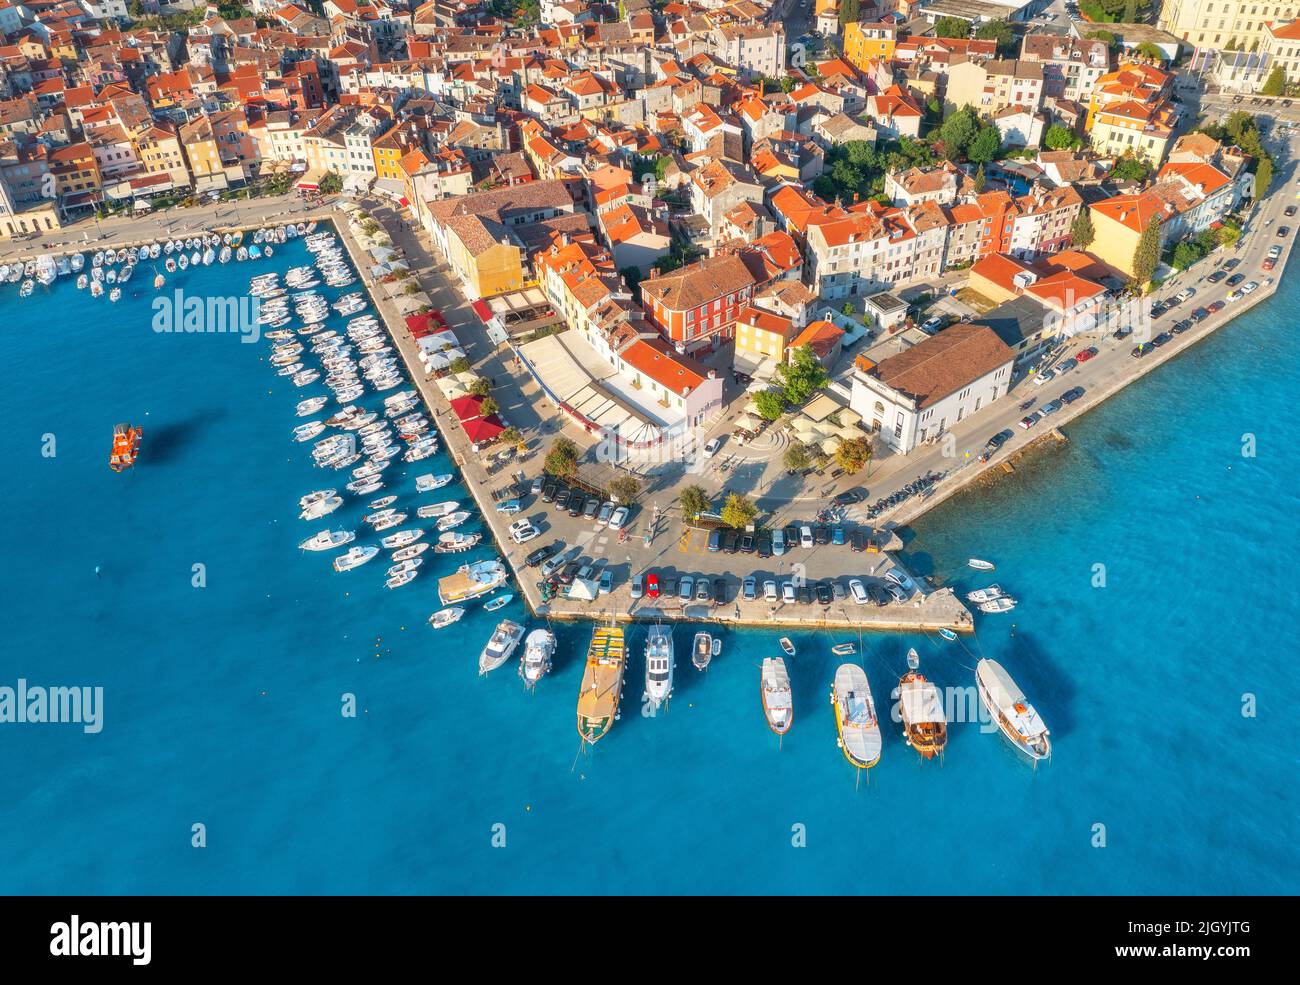 Aerial view of beautiful old city, sea, boats and yachts Stock Photo